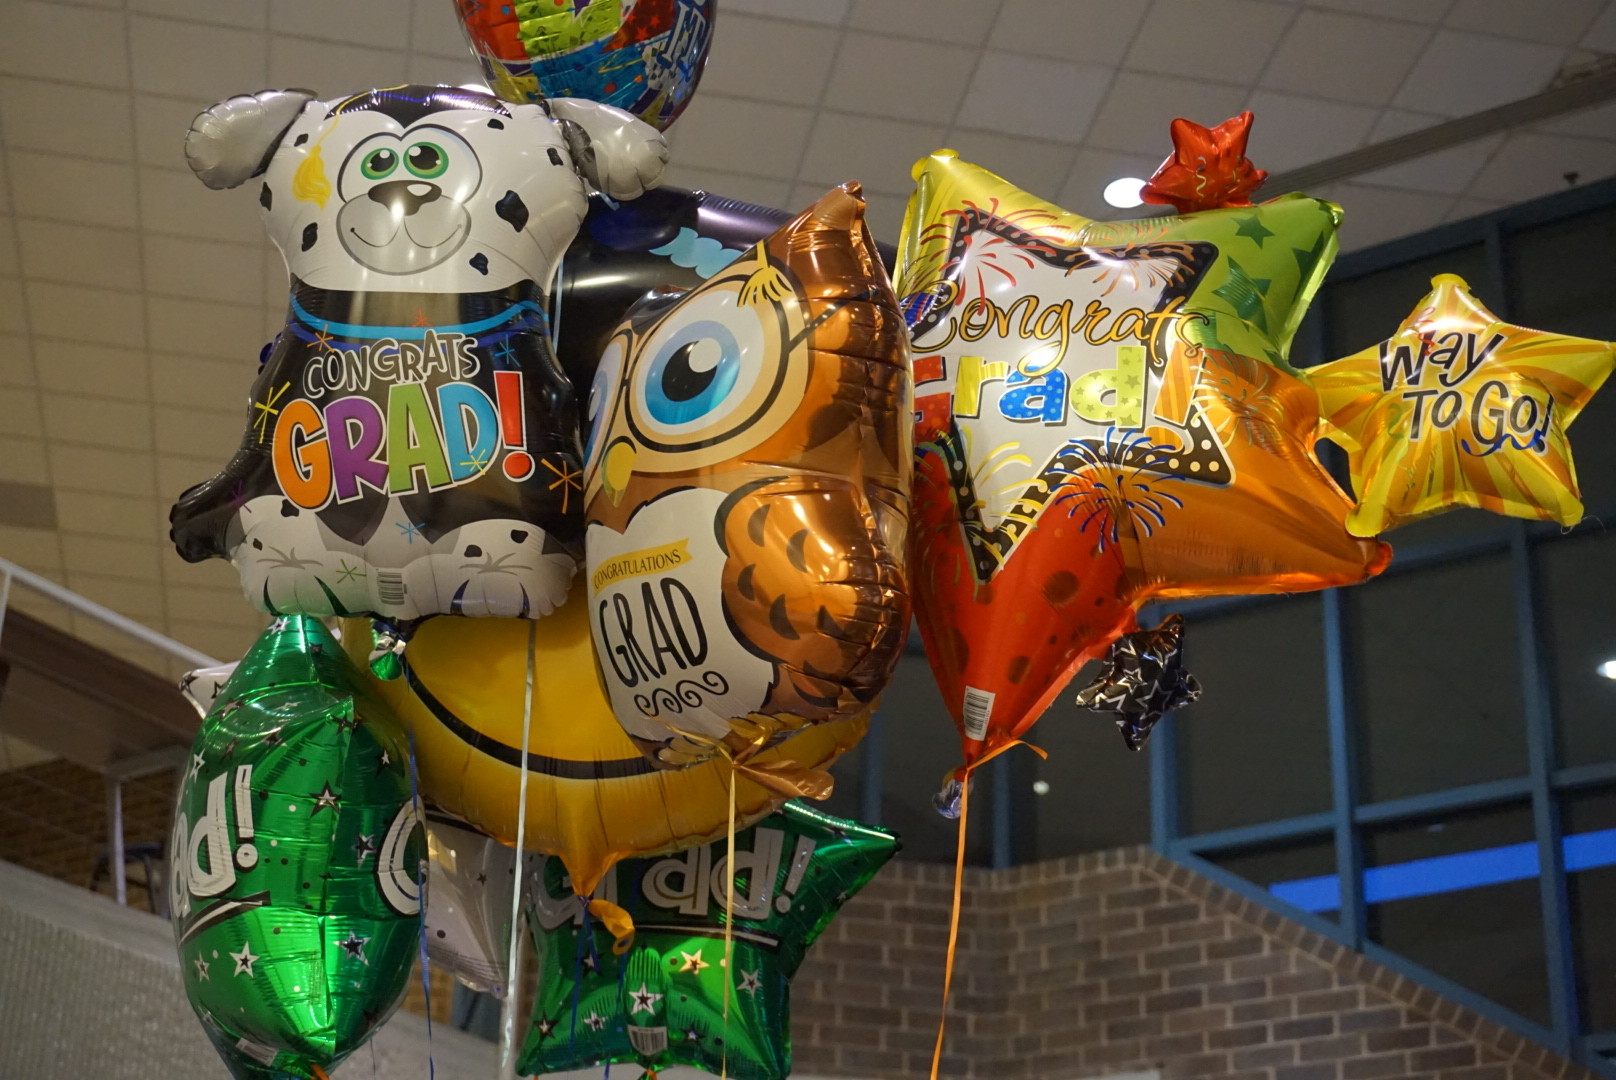 Balloons float around the arena for the grads-to-be